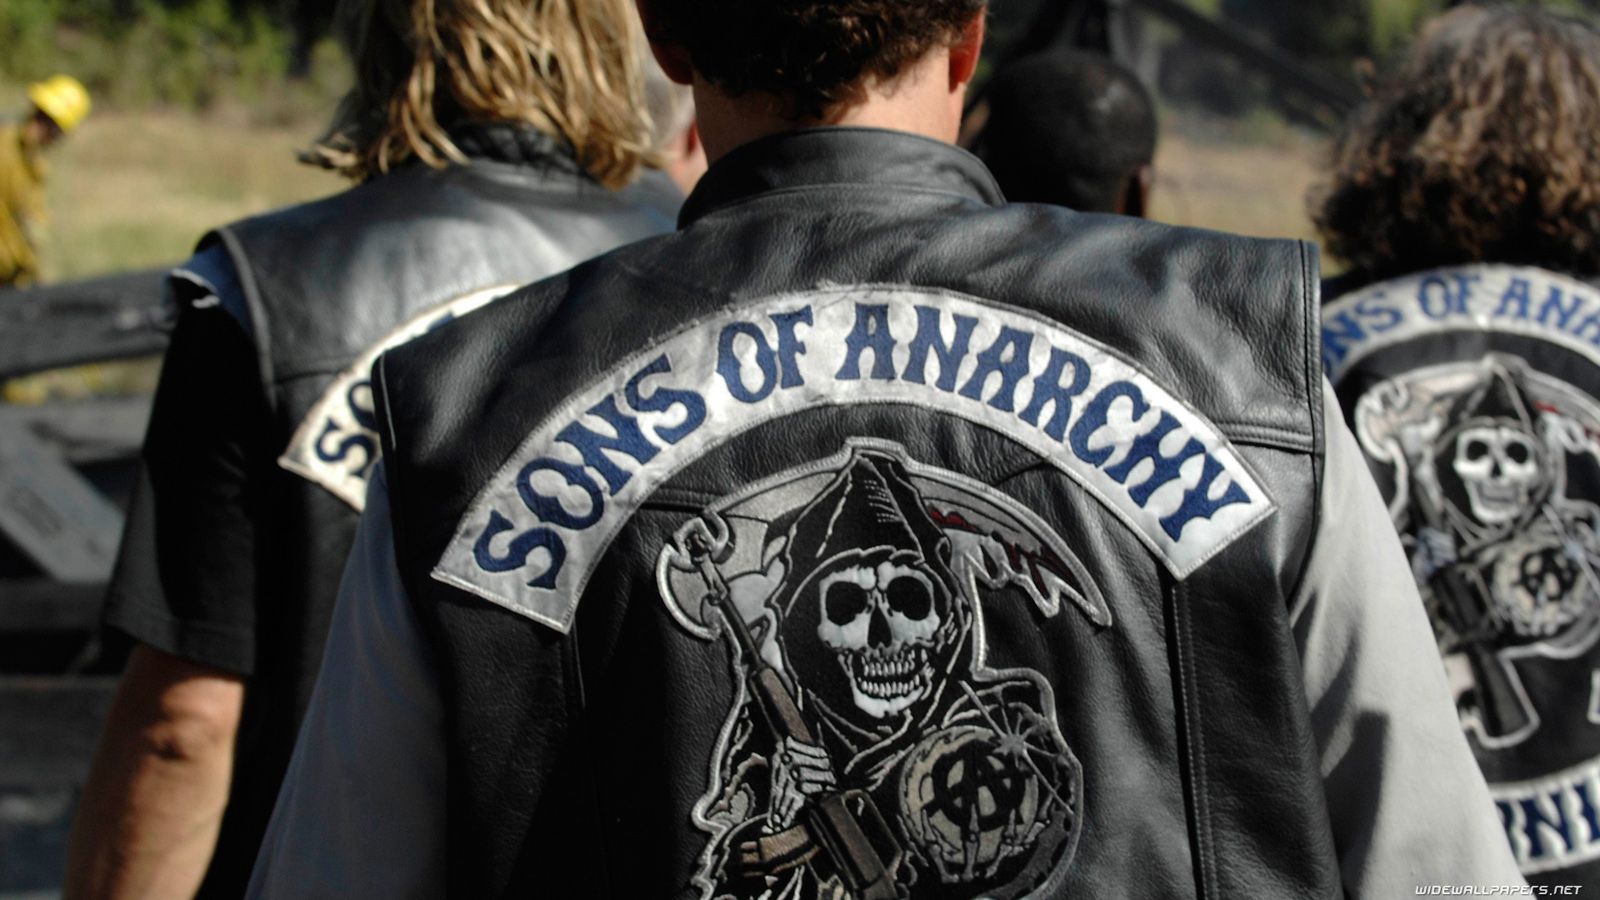 Sons of Anarchy: Hot series to catch up on this fall (after the kids are in bed)